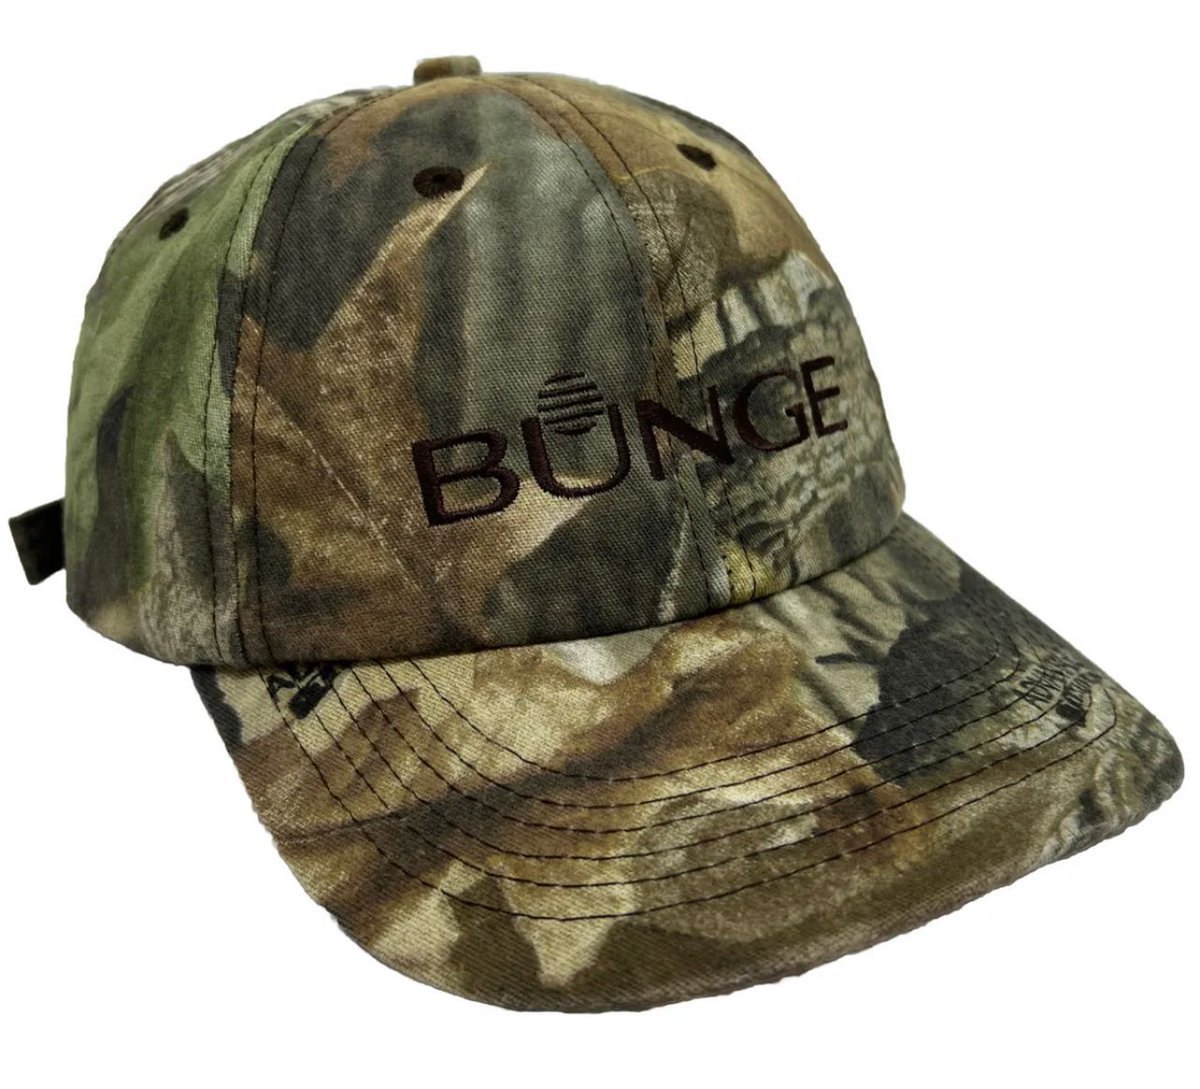 🌾 “The Bunge Realtree Timber Camo Hat has shaded eyes that watched over vast fields. From sunrise to harvest, it’s been a part of agriculture’s story, celebrating the hard work that feeds us. 🚜🌽 #FarmLife #AgriculturePride” buff.ly/3GftC6V